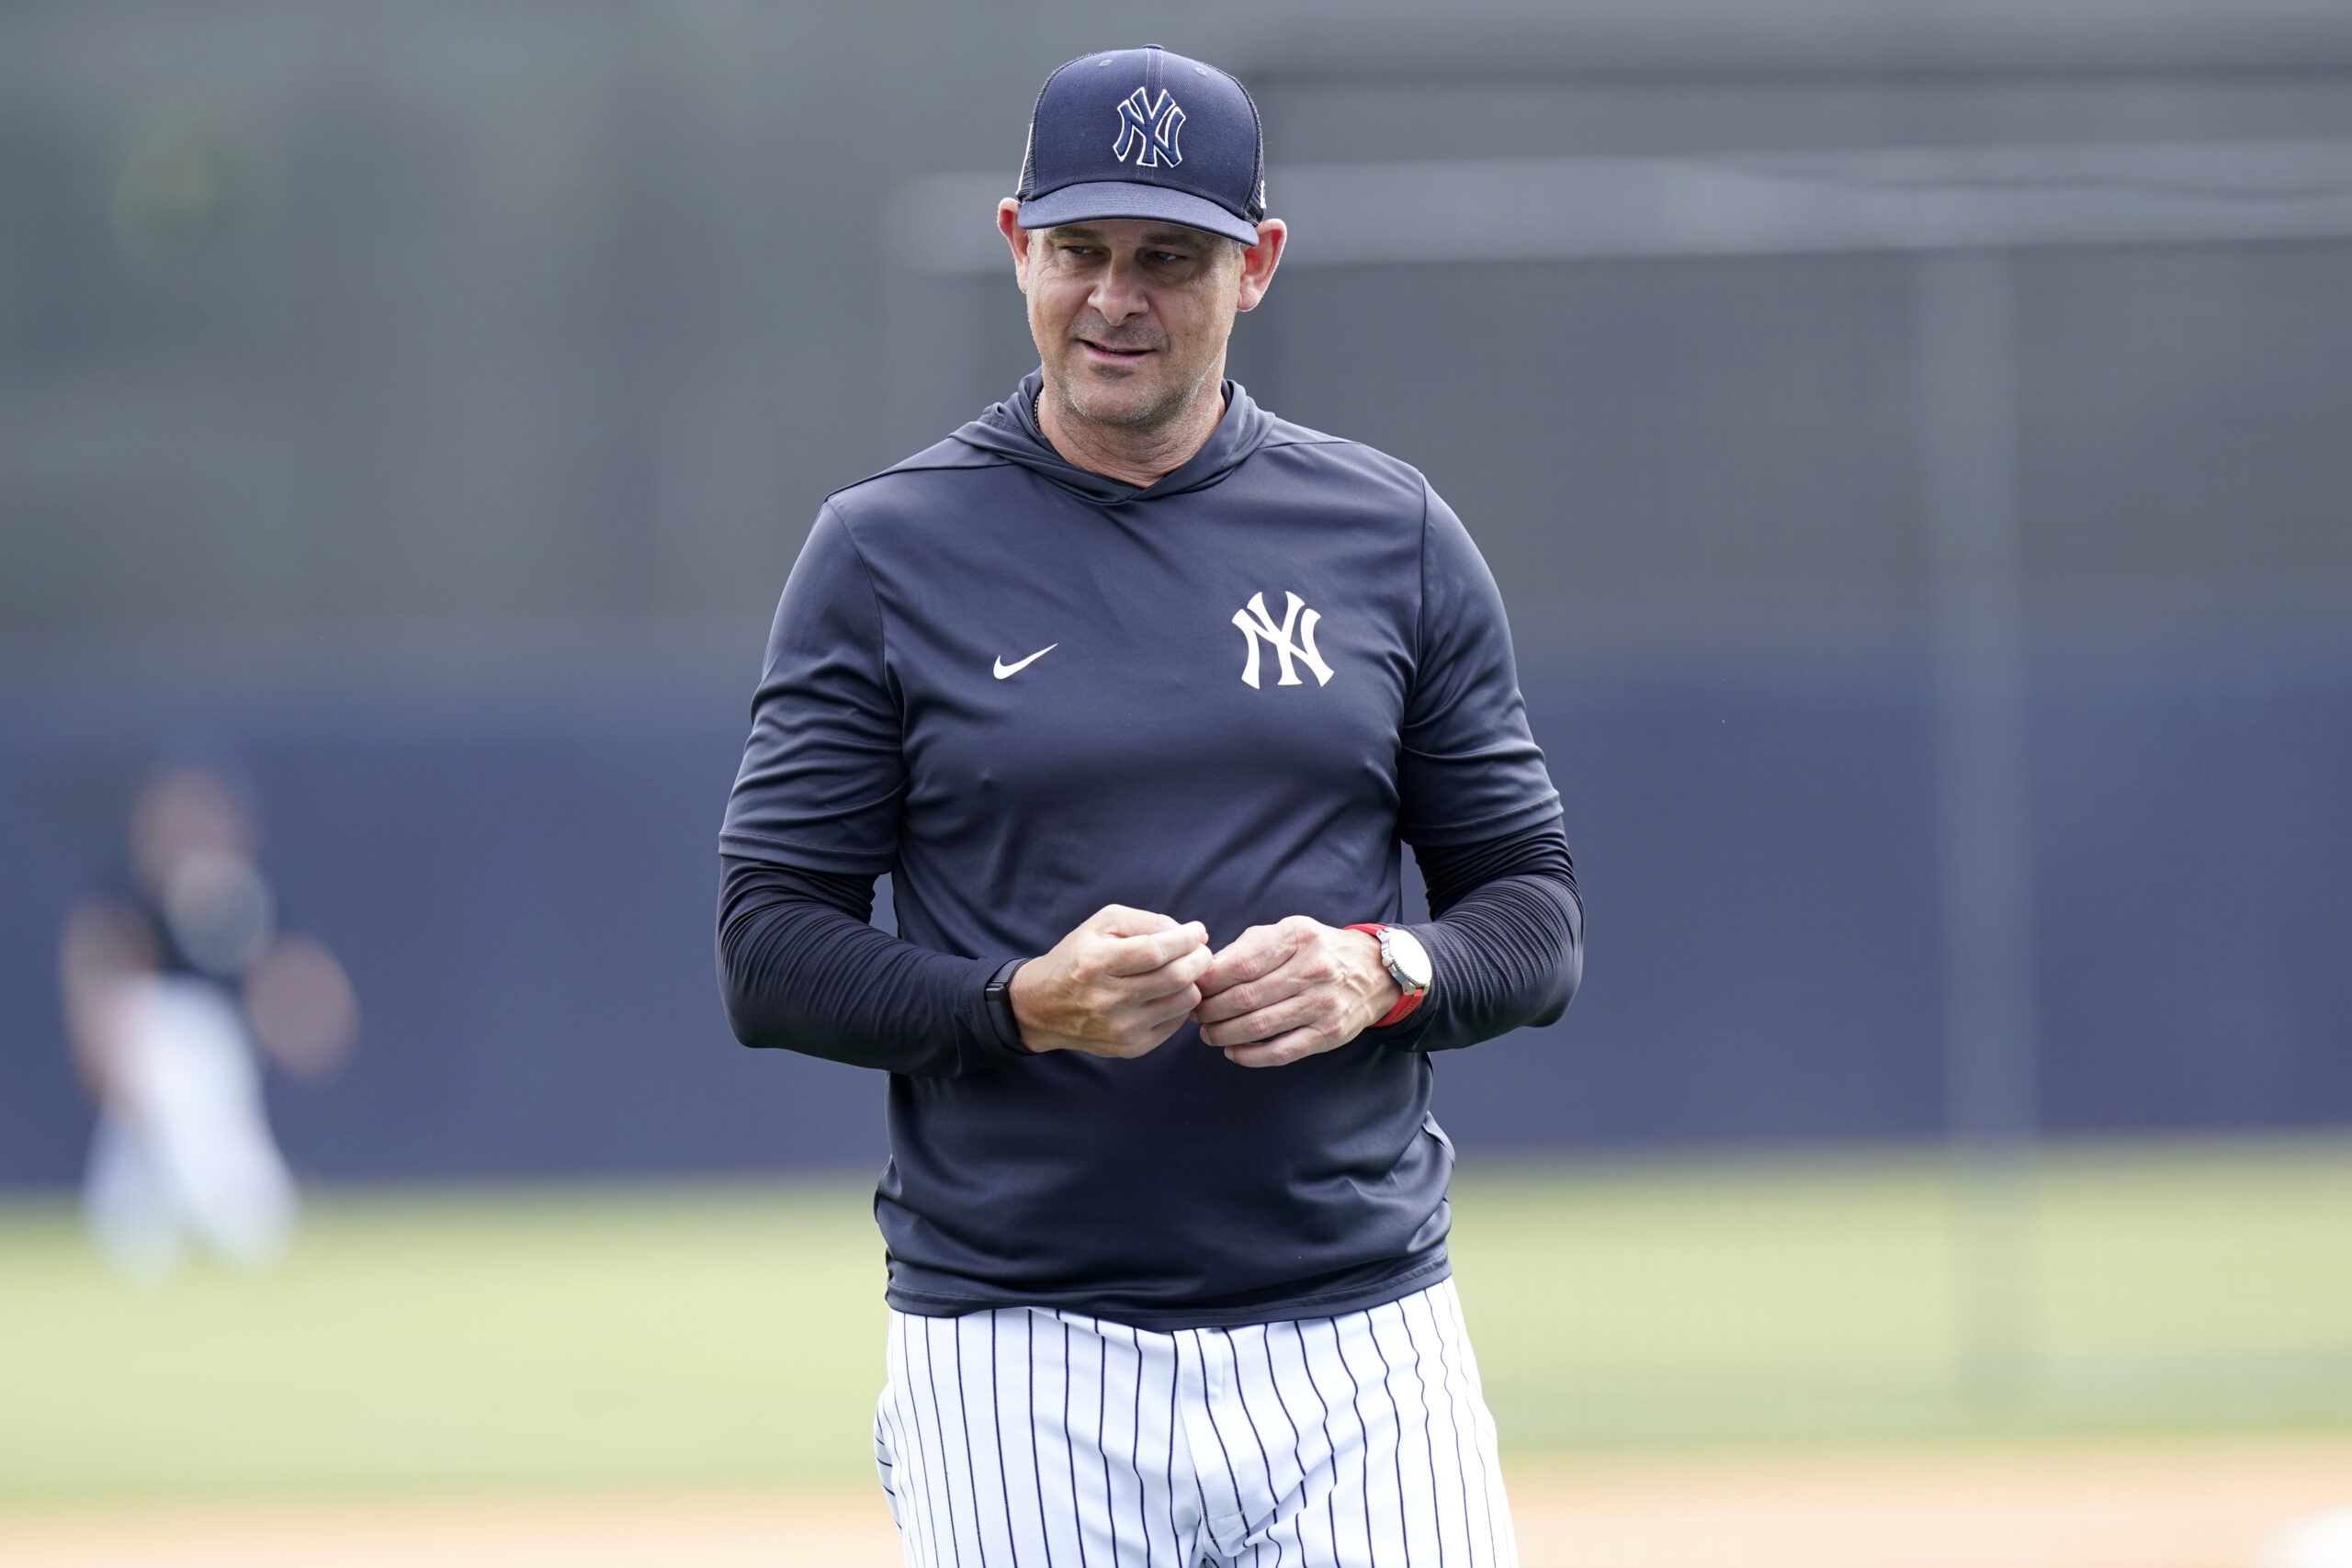 Aaron Boone may have saved job with this Yankees series win